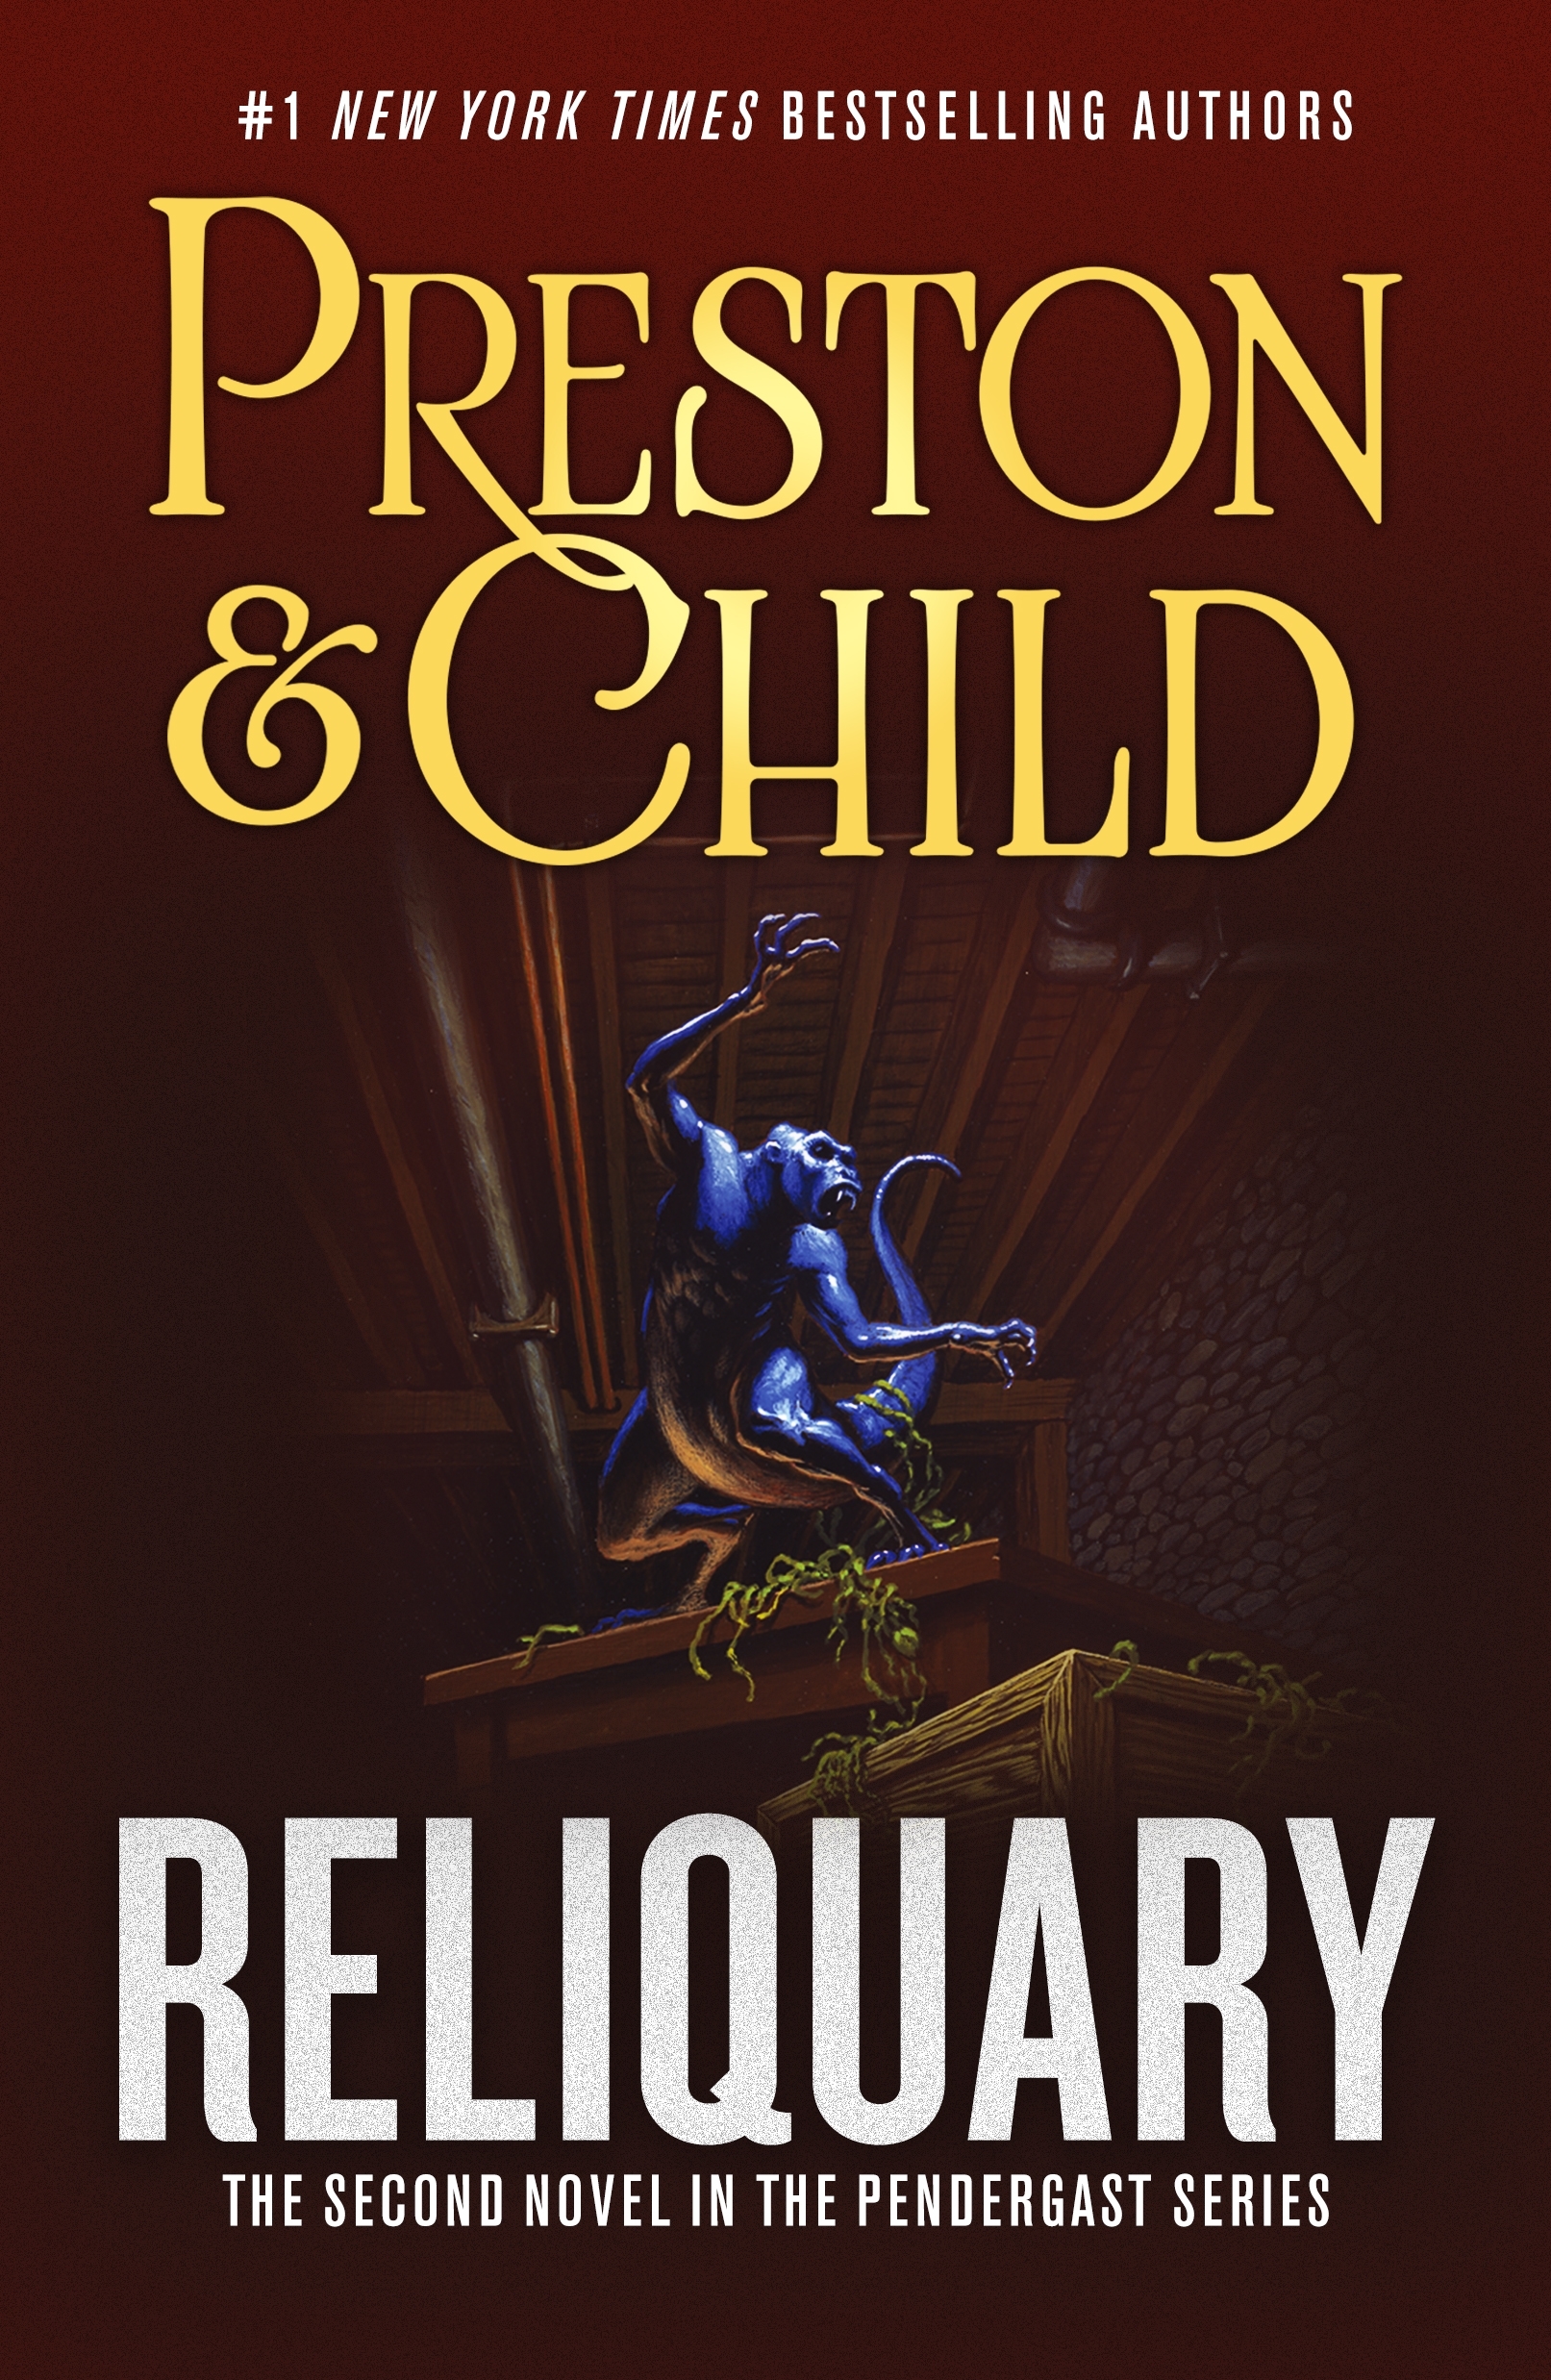 Umschlagbild für Reliquary [electronic resource] : The Second Novel in the Pendergast Series